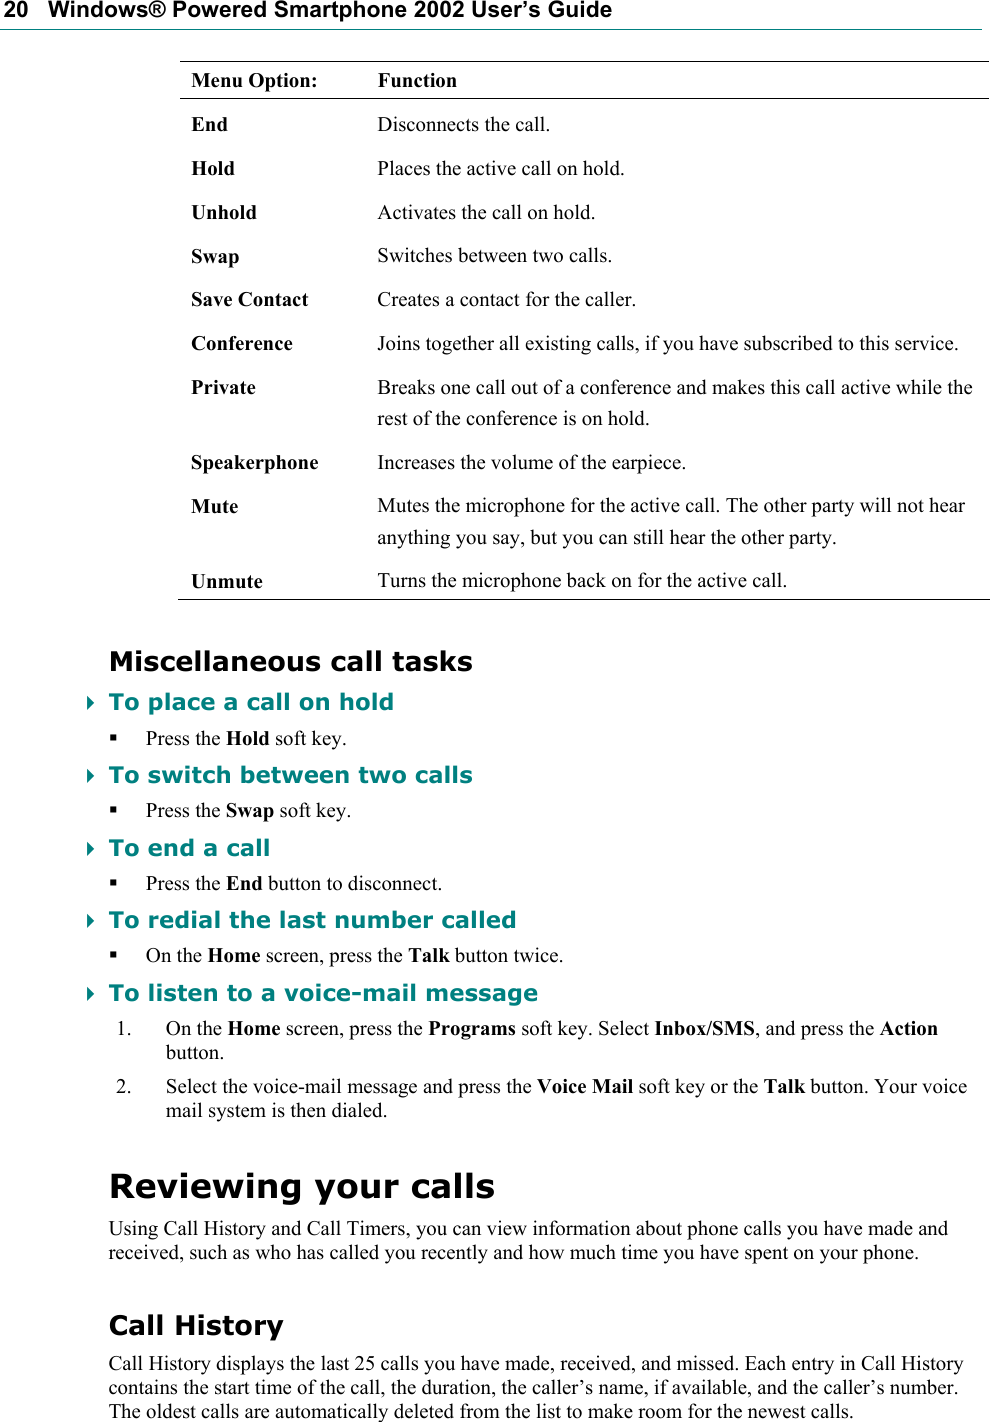 20   Windows® Powered Smartphone 2002 User’s Guide Menu Option:  Function End  Disconnects the call. Hold  Places the active call on hold. Unhold  Activates the call on hold. Swap  Switches between two calls. Save Contact  Creates a contact for the caller. Conference  Joins together all existing calls, if you have subscribed to this service. Private  Breaks one call out of a conference and makes this call active while the rest of the conference is on hold. Speakerphone  Increases the volume of the earpiece. Mute  Mutes the microphone for the active call. The other party will not hear anything you say, but you can still hear the other party. Unmute  Turns the microphone back on for the active call. Miscellaneous call tasks  To place a call on hold  Press the Hold soft key.  To switch between two calls  Press the Swap soft key.  To end a call  Press the End button to disconnect.  To redial the last number called  On the Home screen, press the Talk button twice.  To listen to a voice-mail message 1. On the Home screen, press the Programs soft key. Select Inbox/SMS, and press the Action button. 2. Select the voice-mail message and press the Voice Mail soft key or the Talk button. Your voice mail system is then dialed. Reviewing your calls Using Call History and Call Timers, you can view information about phone calls you have made and received, such as who has called you recently and how much time you have spent on your phone. Call History Call History displays the last 25 calls you have made, received, and missed. Each entry in Call History contains the start time of the call, the duration, the caller’s name, if available, and the caller’s number. The oldest calls are automatically deleted from the list to make room for the newest calls. 